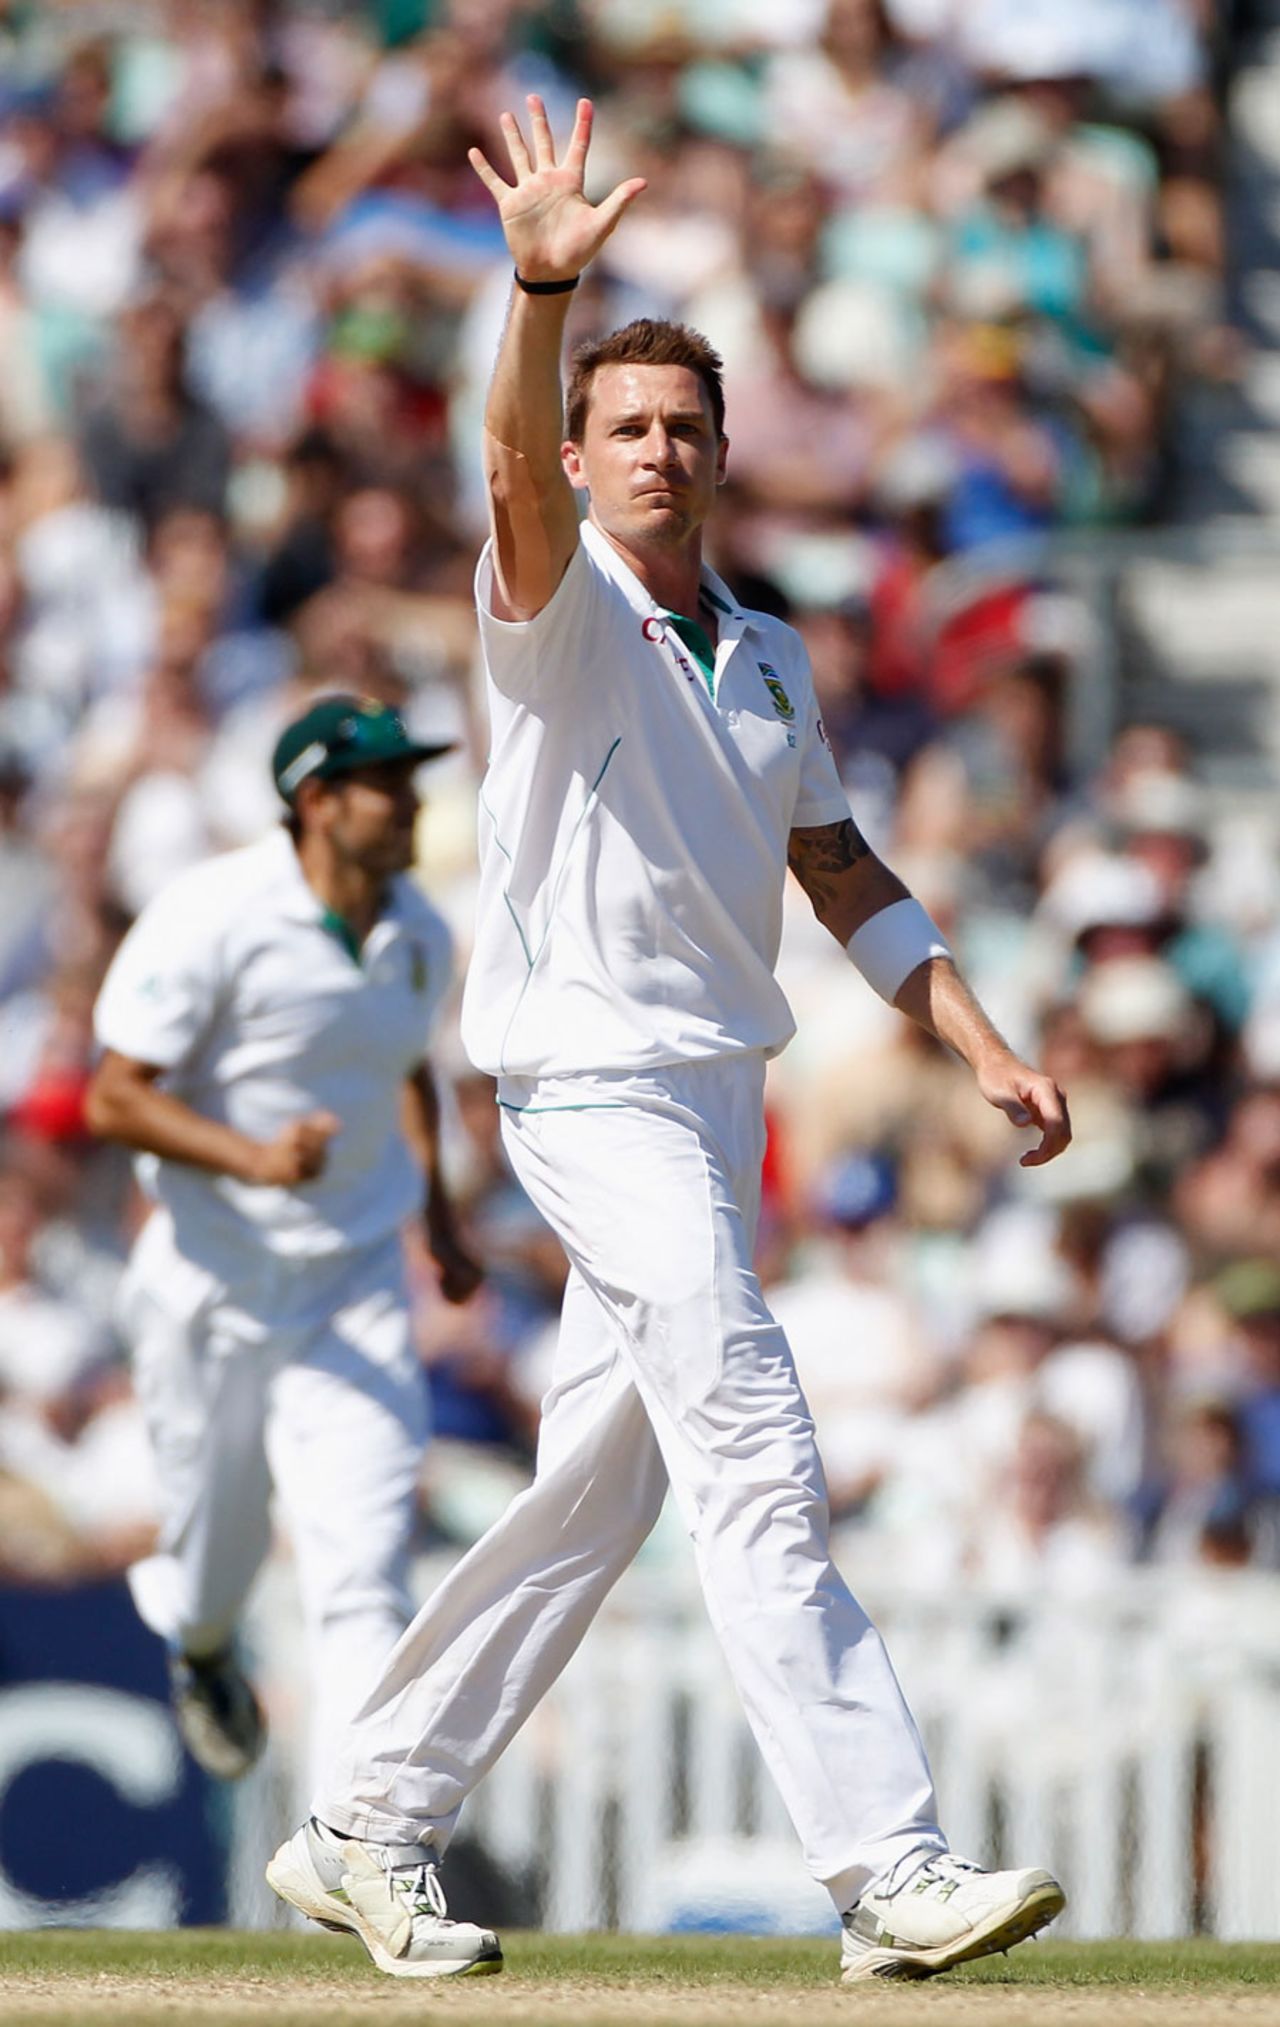 Dale Steyn dismissed Graeme Swann to claim his fifth wicket, England v South Africa, 1st Test, The Oval, 5th day, July 23, 2012